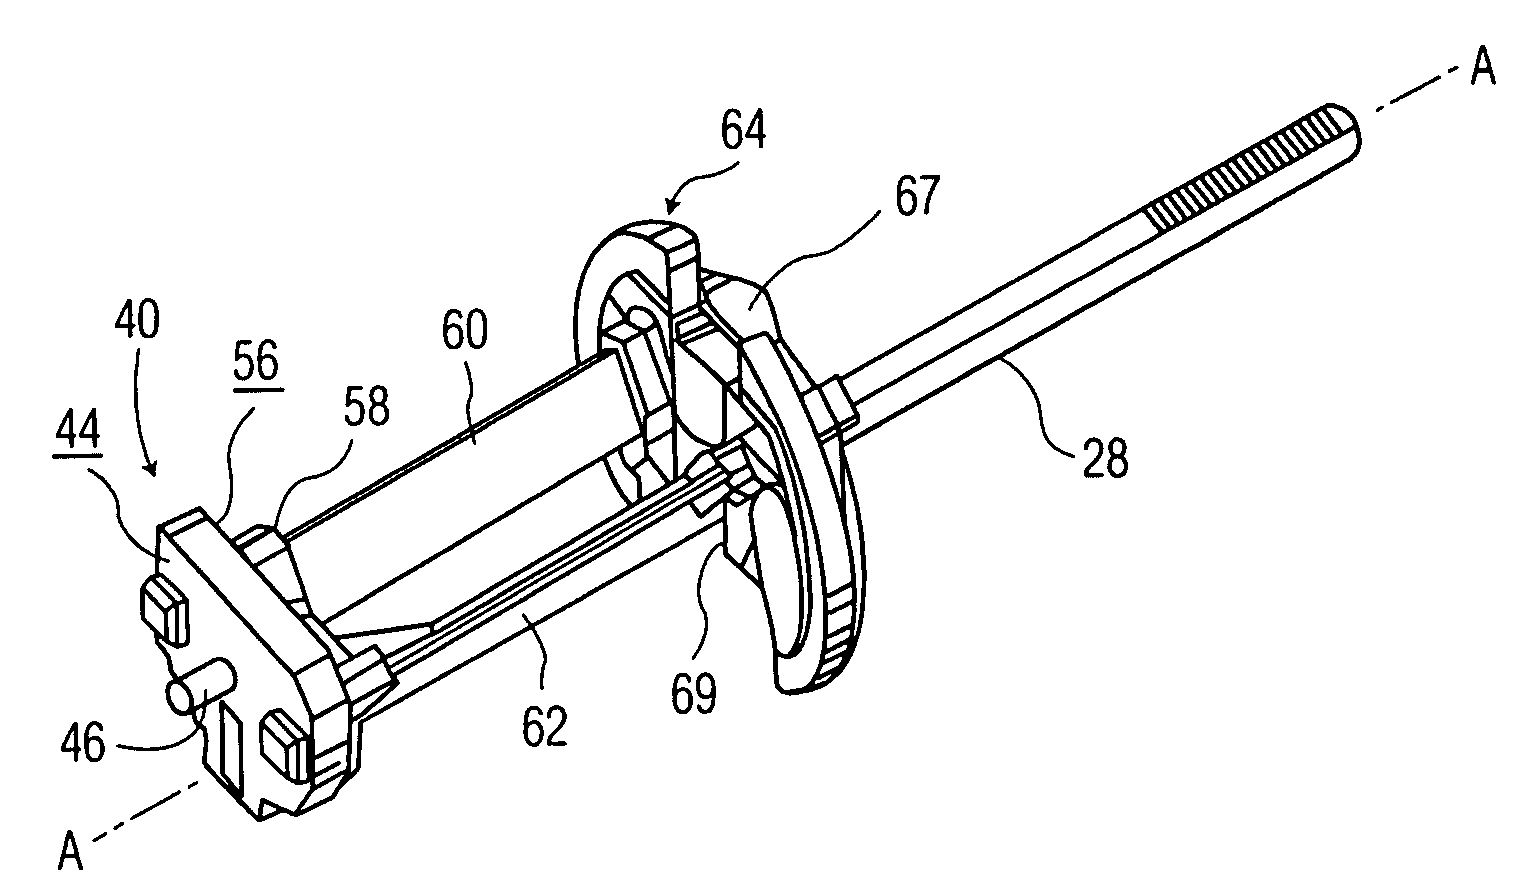 Apparatus for converting side-to-side driving motion to rotational motion with a spring assembly and system for tuning the spring assembly